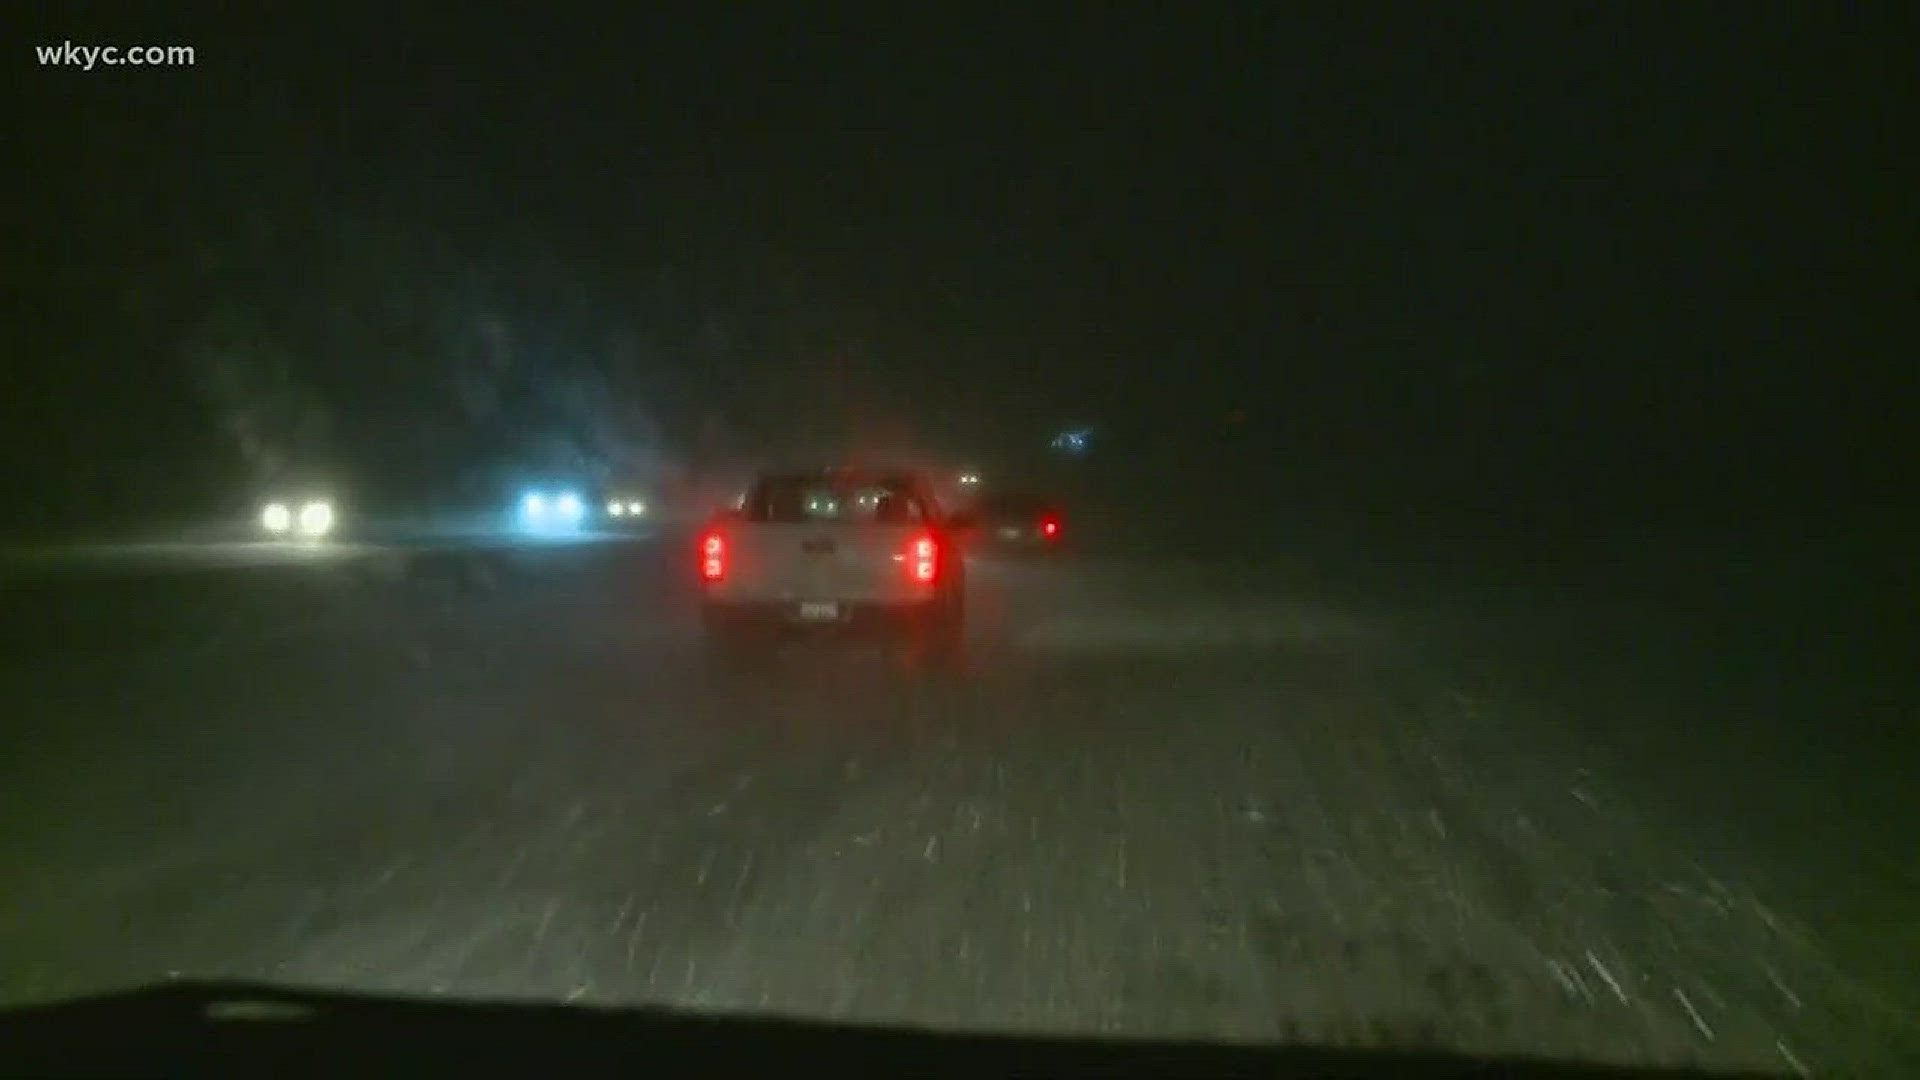 Feb. 7, 2018: Tough travel conditions in Summit County as snow was falling fast at 5 a.m.